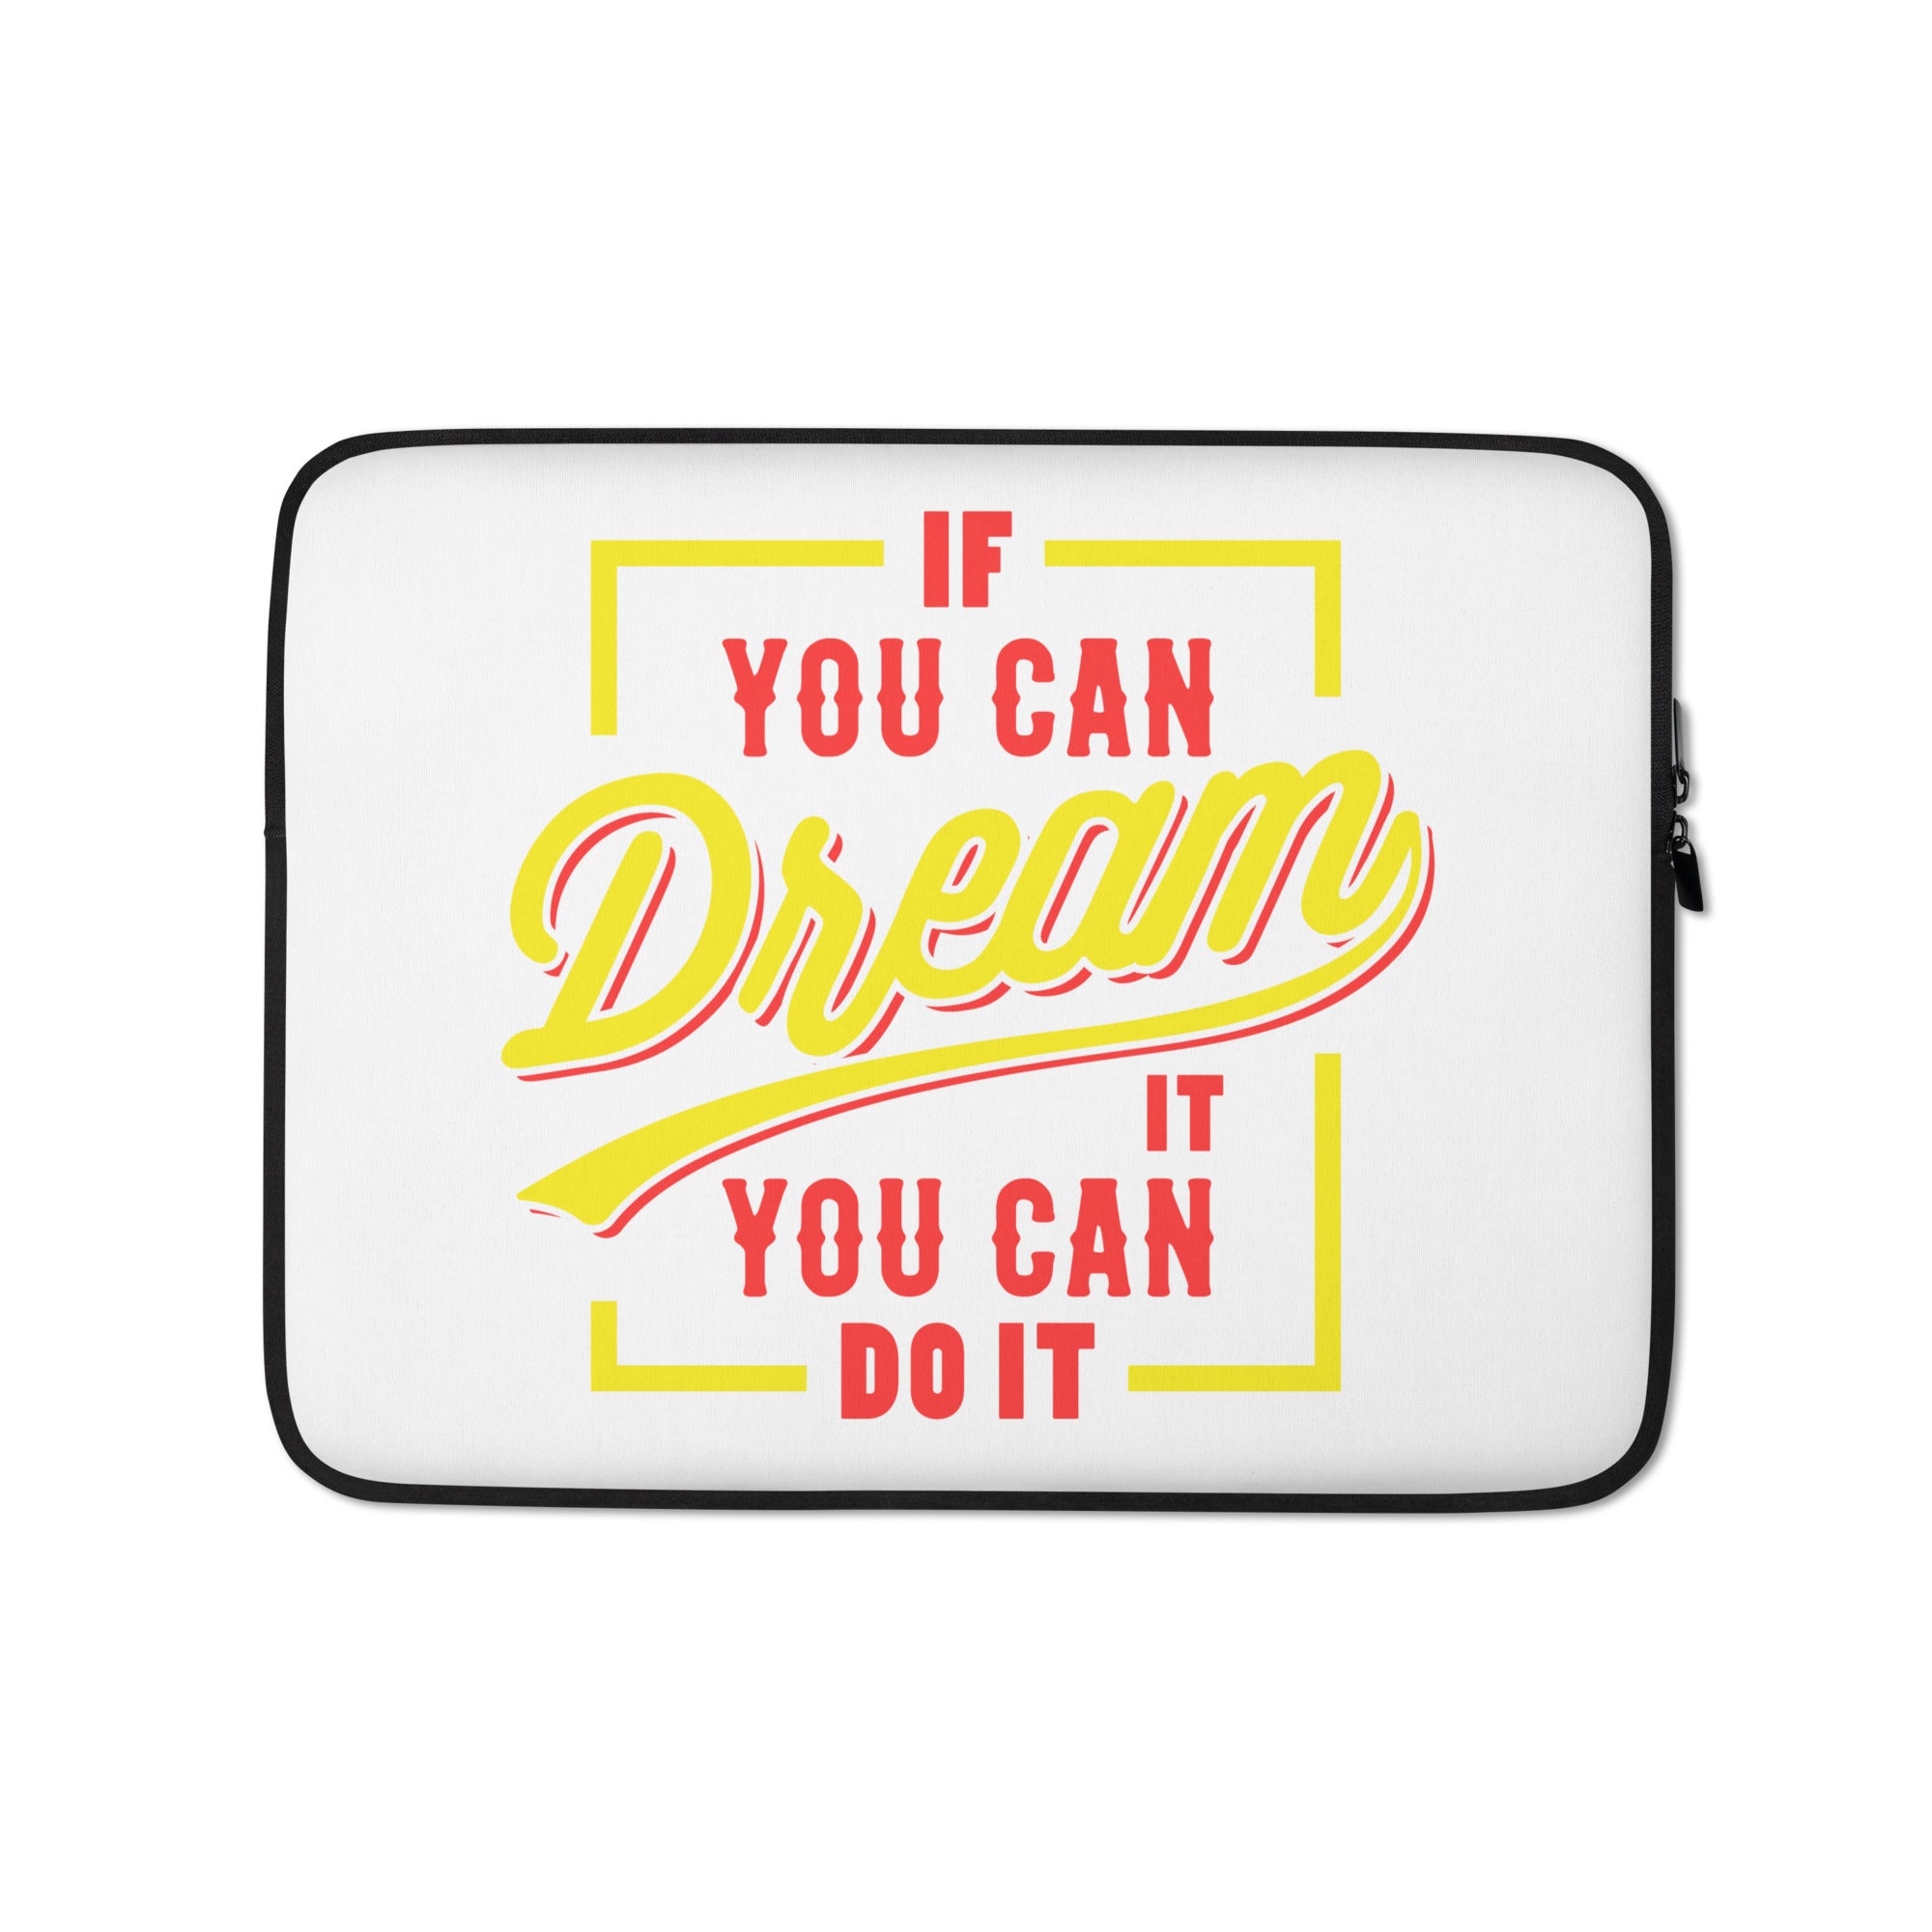 If You Can Dream It, You Can Do It - Laptop Sleeve